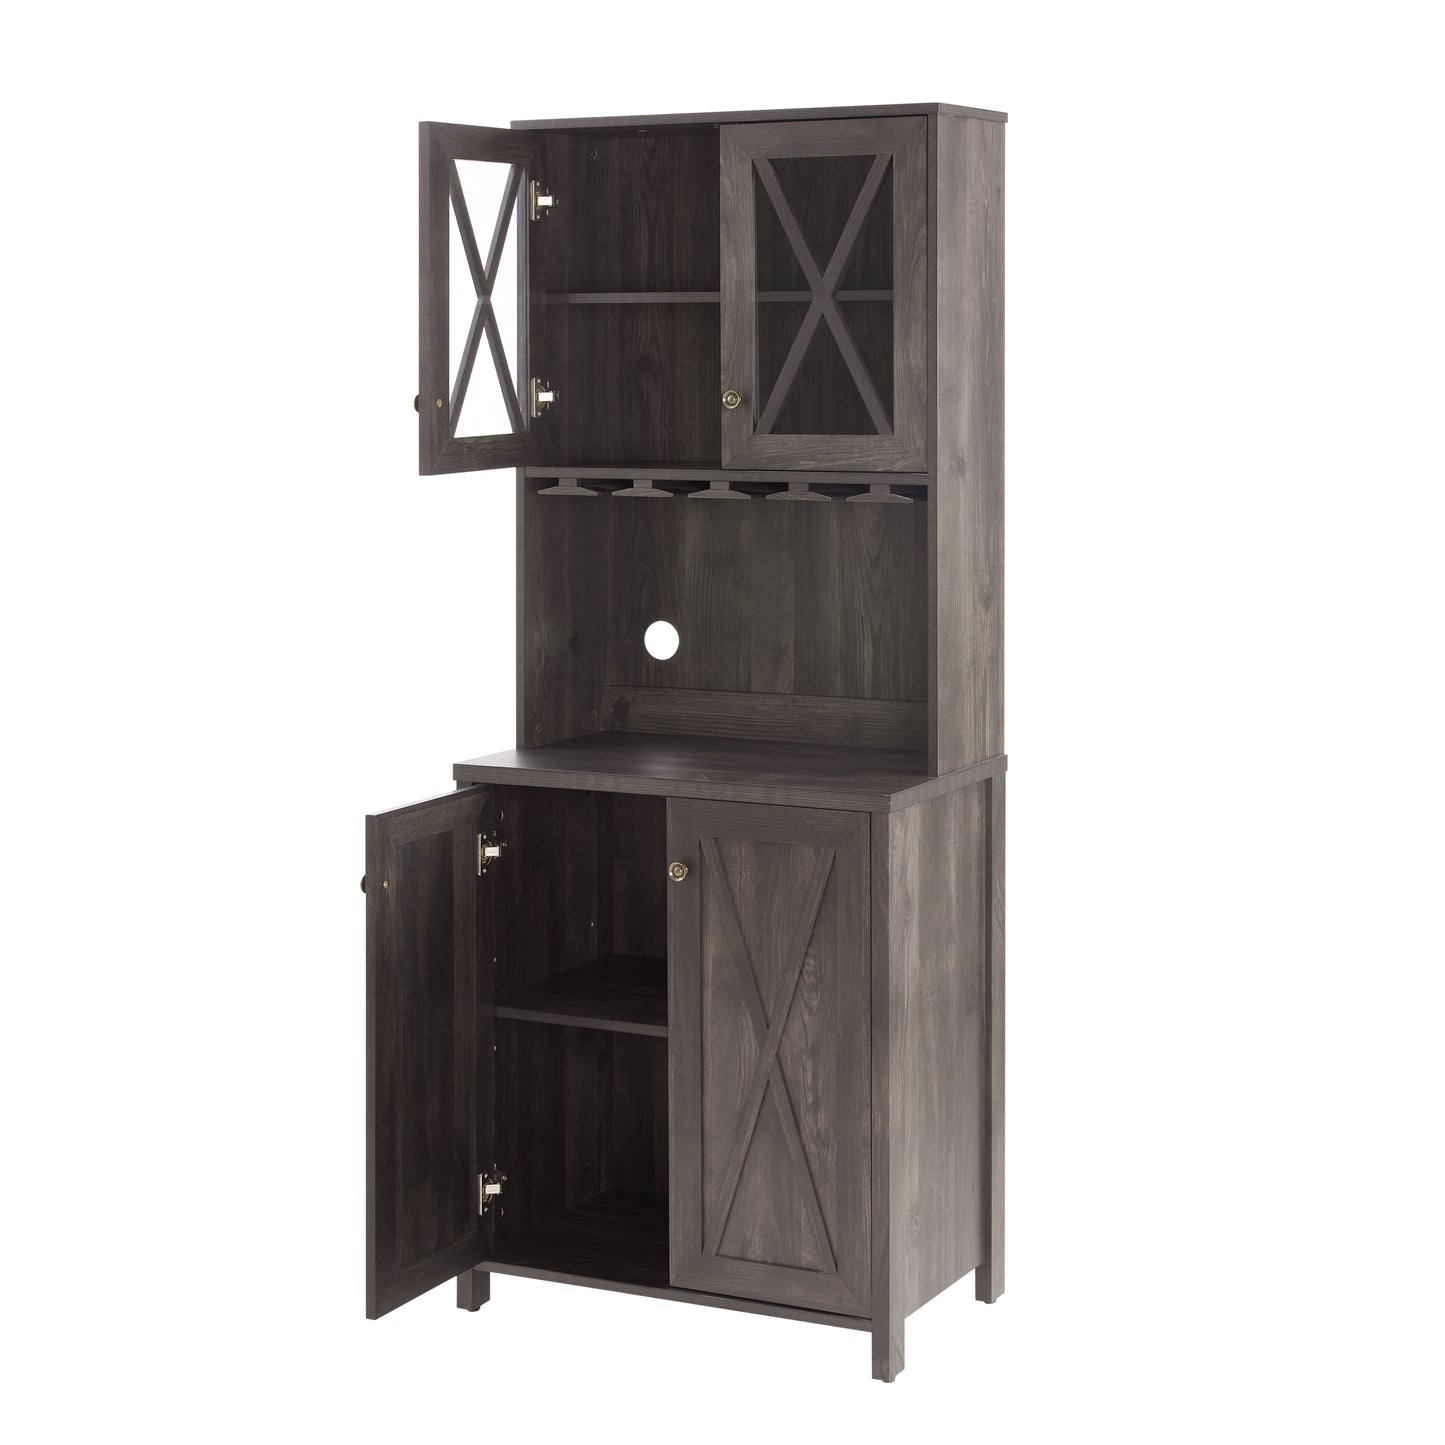 Farmhouse Bar Cabinet for Liquor and Glasses, Dining Room Kitchen Cabinet with Wine Rack, Sideboards Buffets Bar Cabinet L26.89''*W15.87''*H67.3'' Charcoal Grey